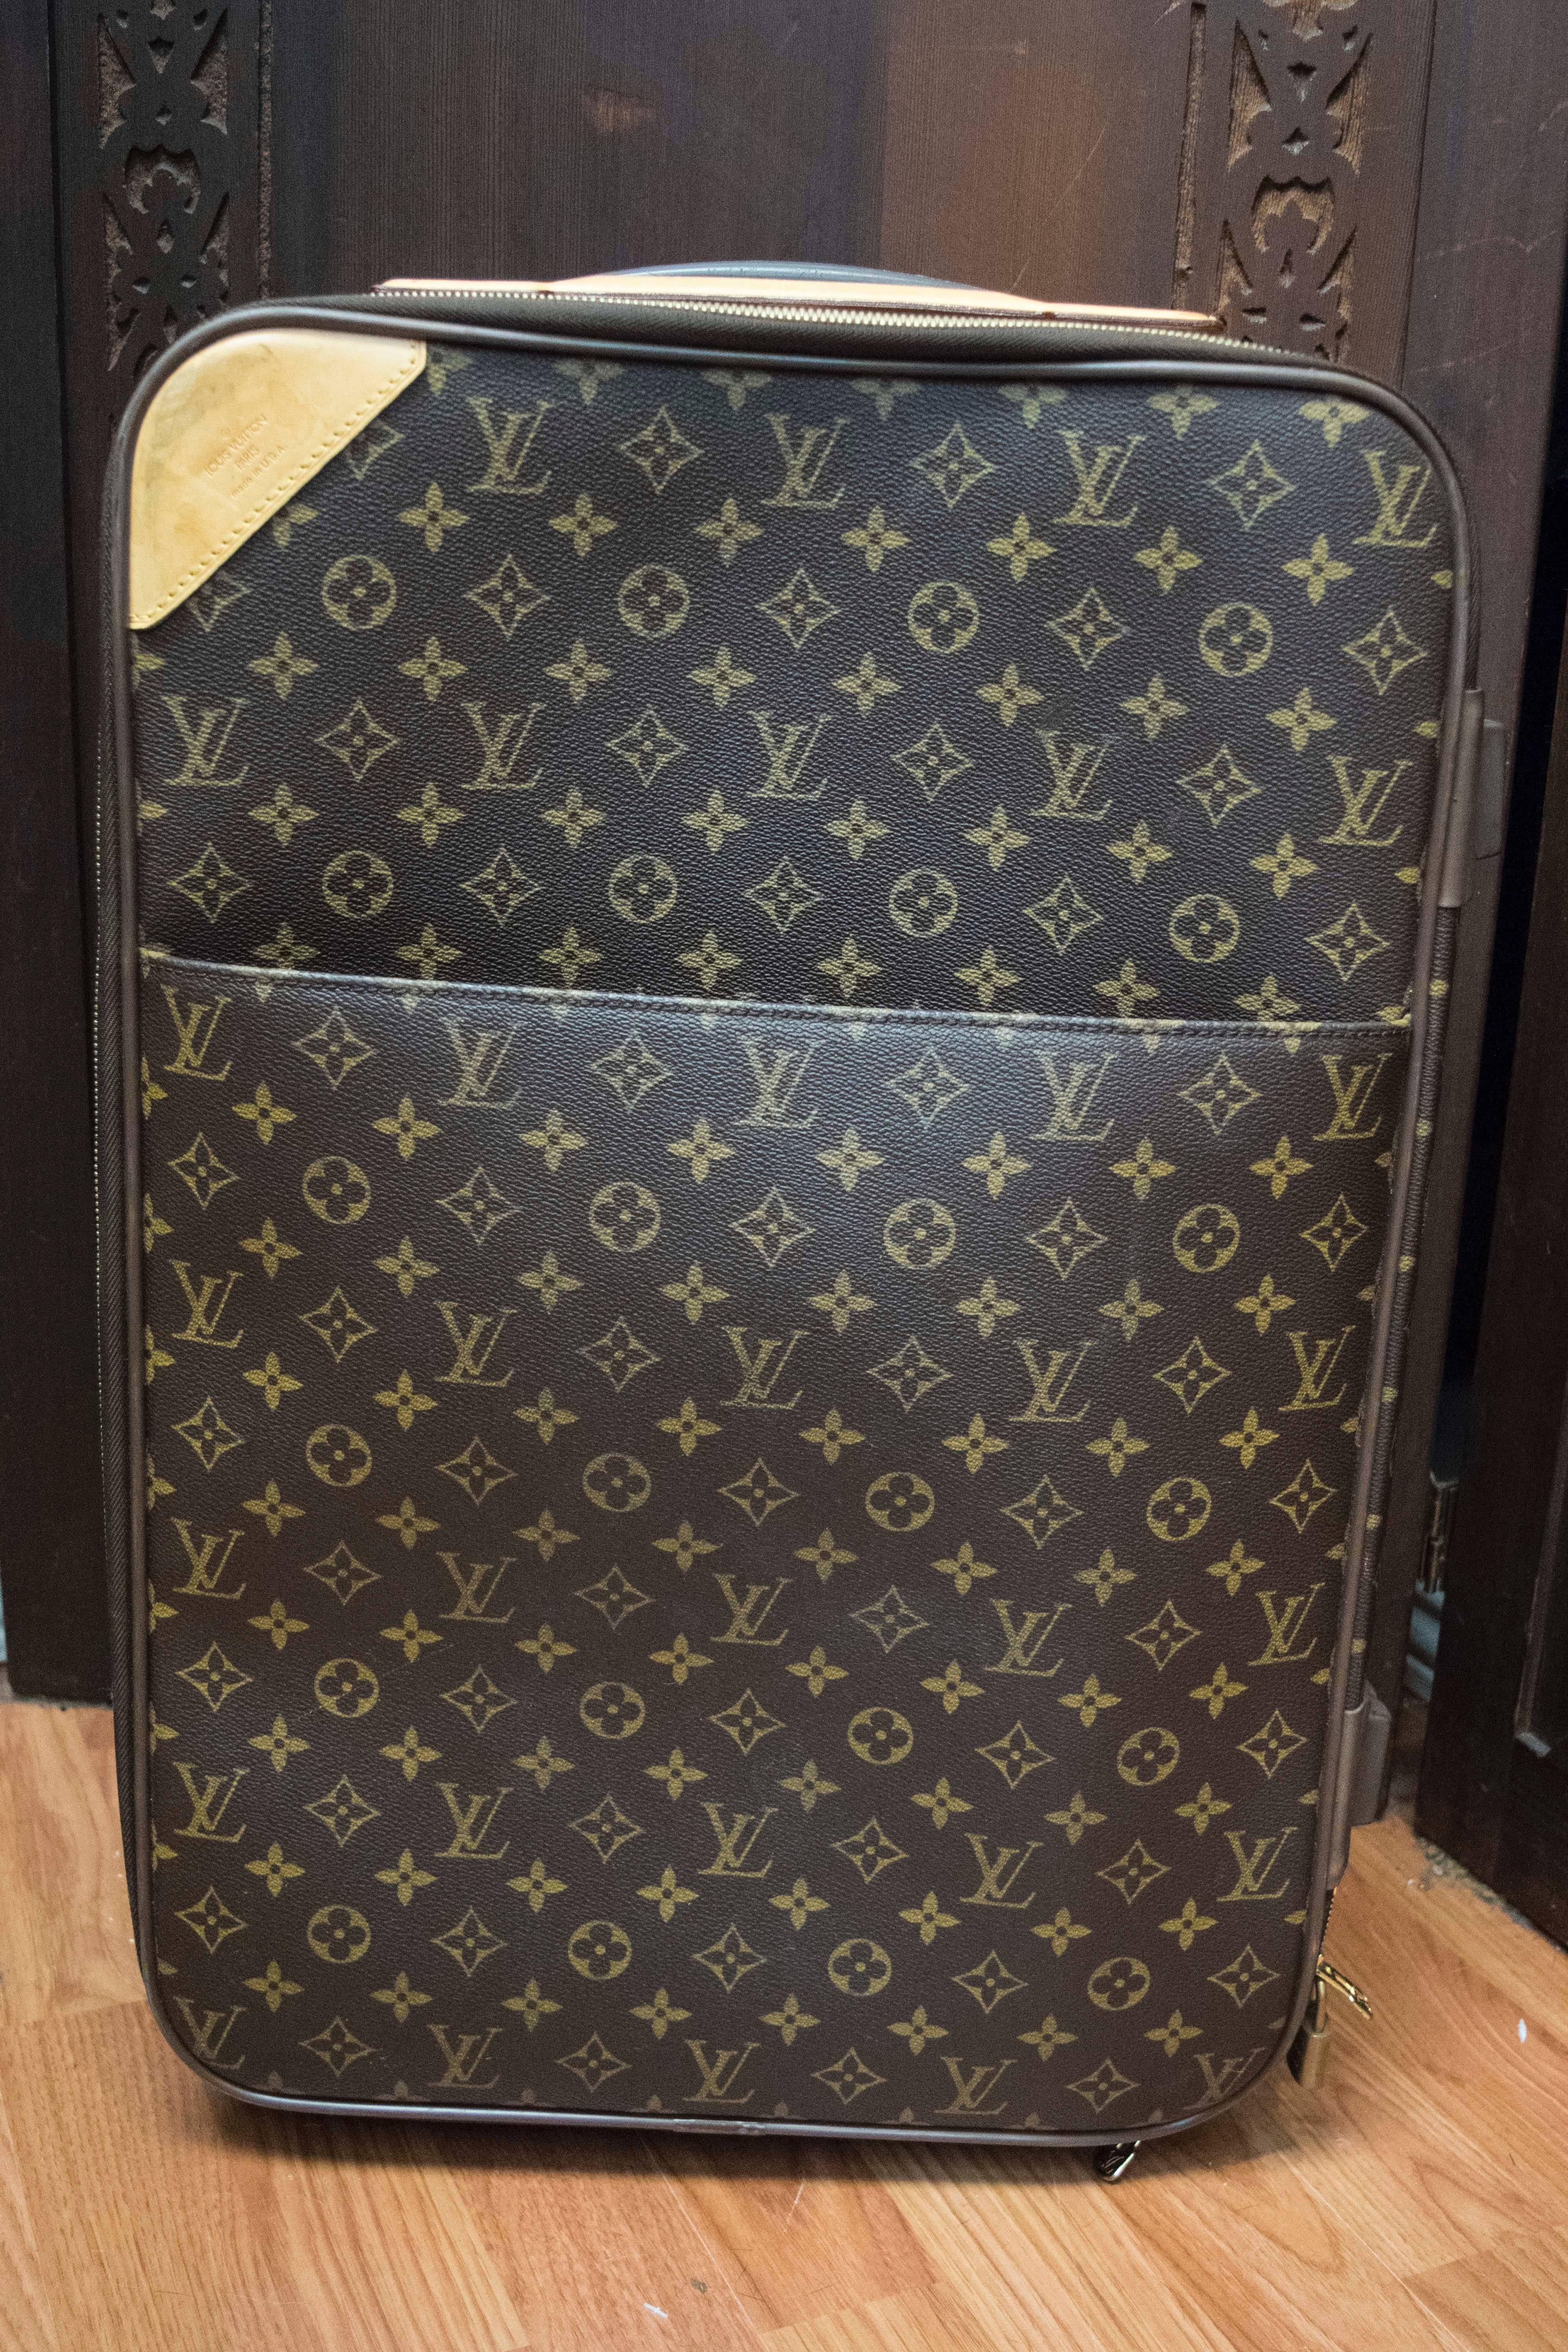 Louis Vuitton Monogram Carry On Suitcase

Travel in style with this chic authentic Louis Vuitton rolling suitcase. The durable and timeless Monogram Canvas exterior is thoughtfully enhanced with smooth rolling wheels and a convenient retractable